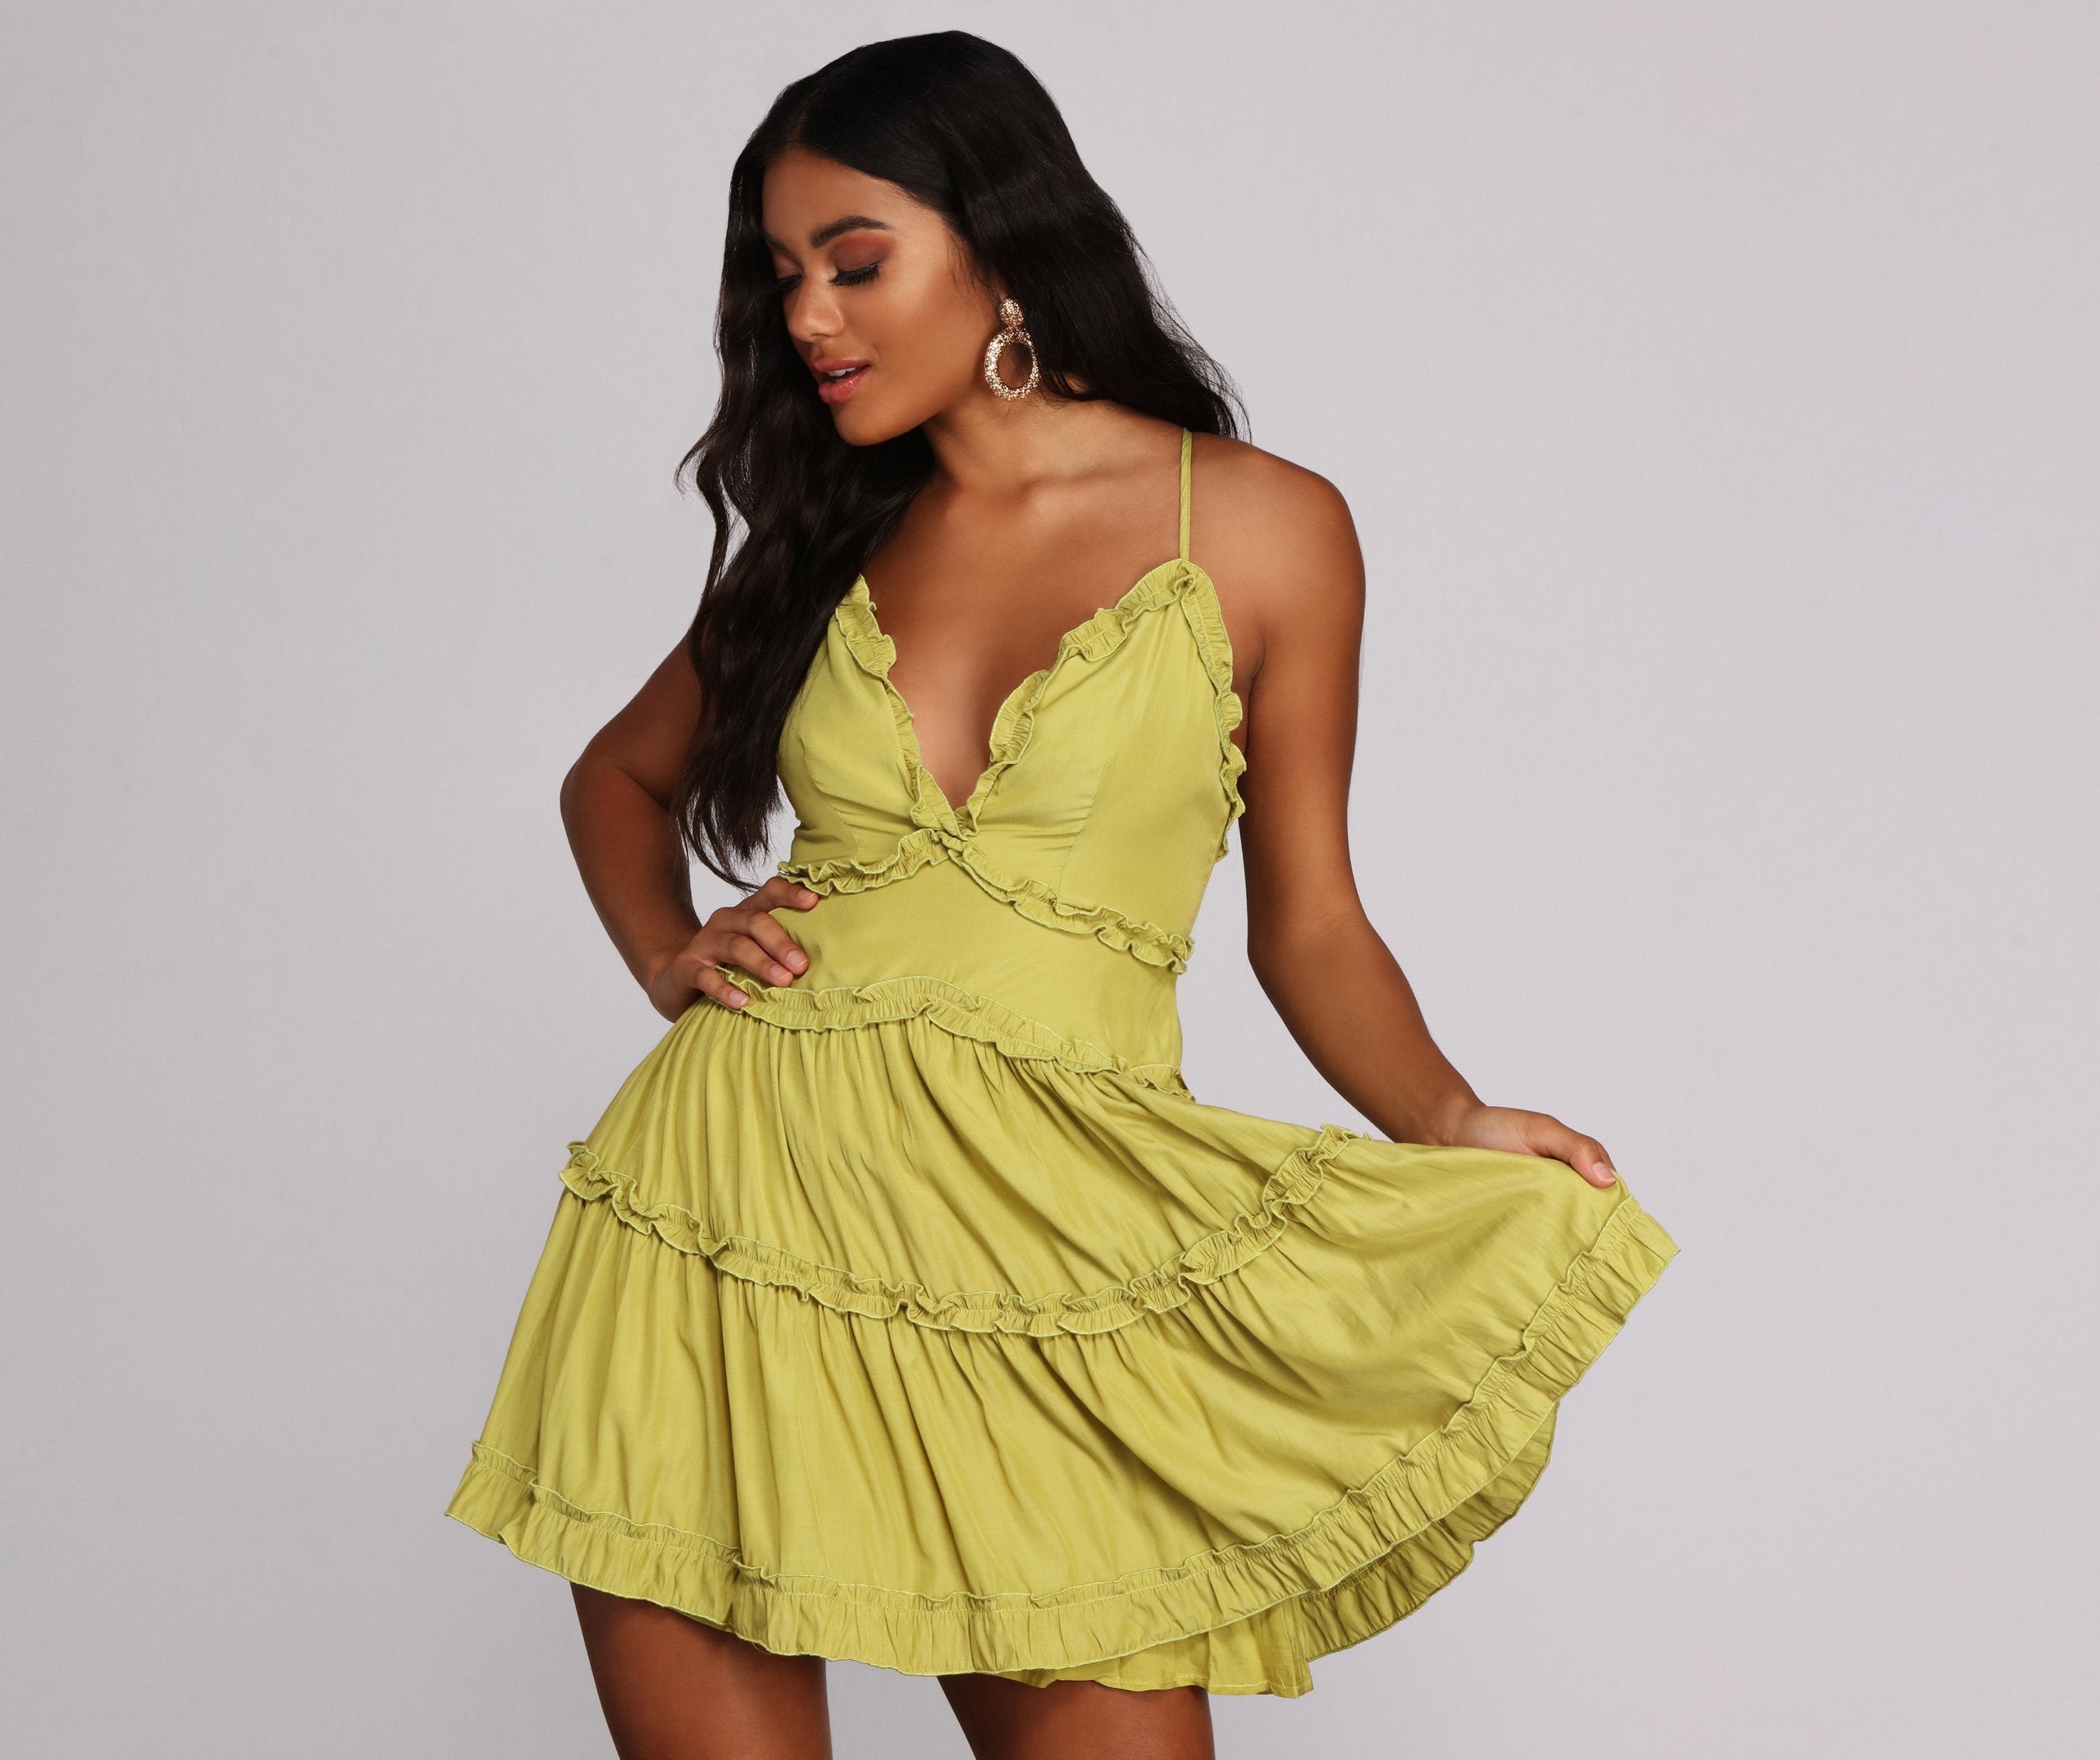 Ruffle Ride Skater Dress - Lady Occasions